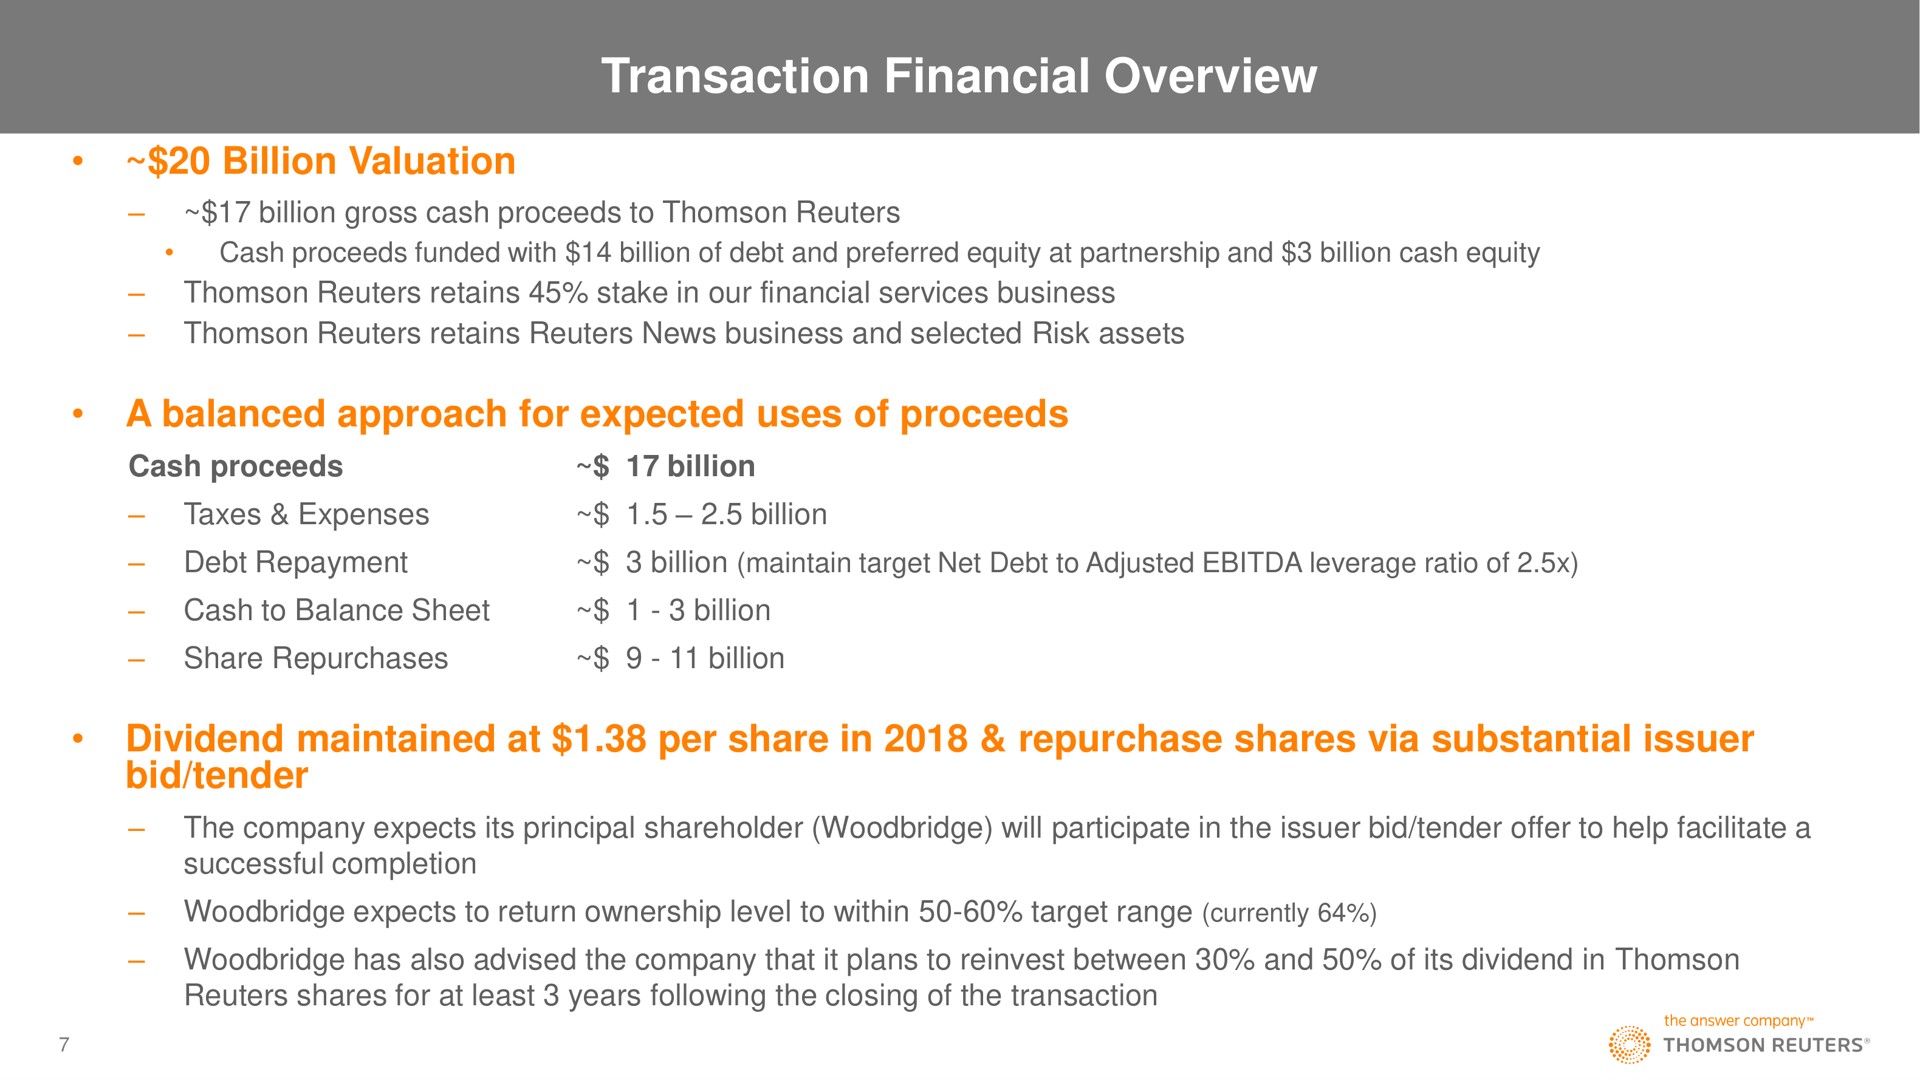 transaction financial overview billion valuation a balanced approach for expected uses of proceeds dividend maintained at per share in repurchase shares via substantial issuer bid tender | Thomson Reuters